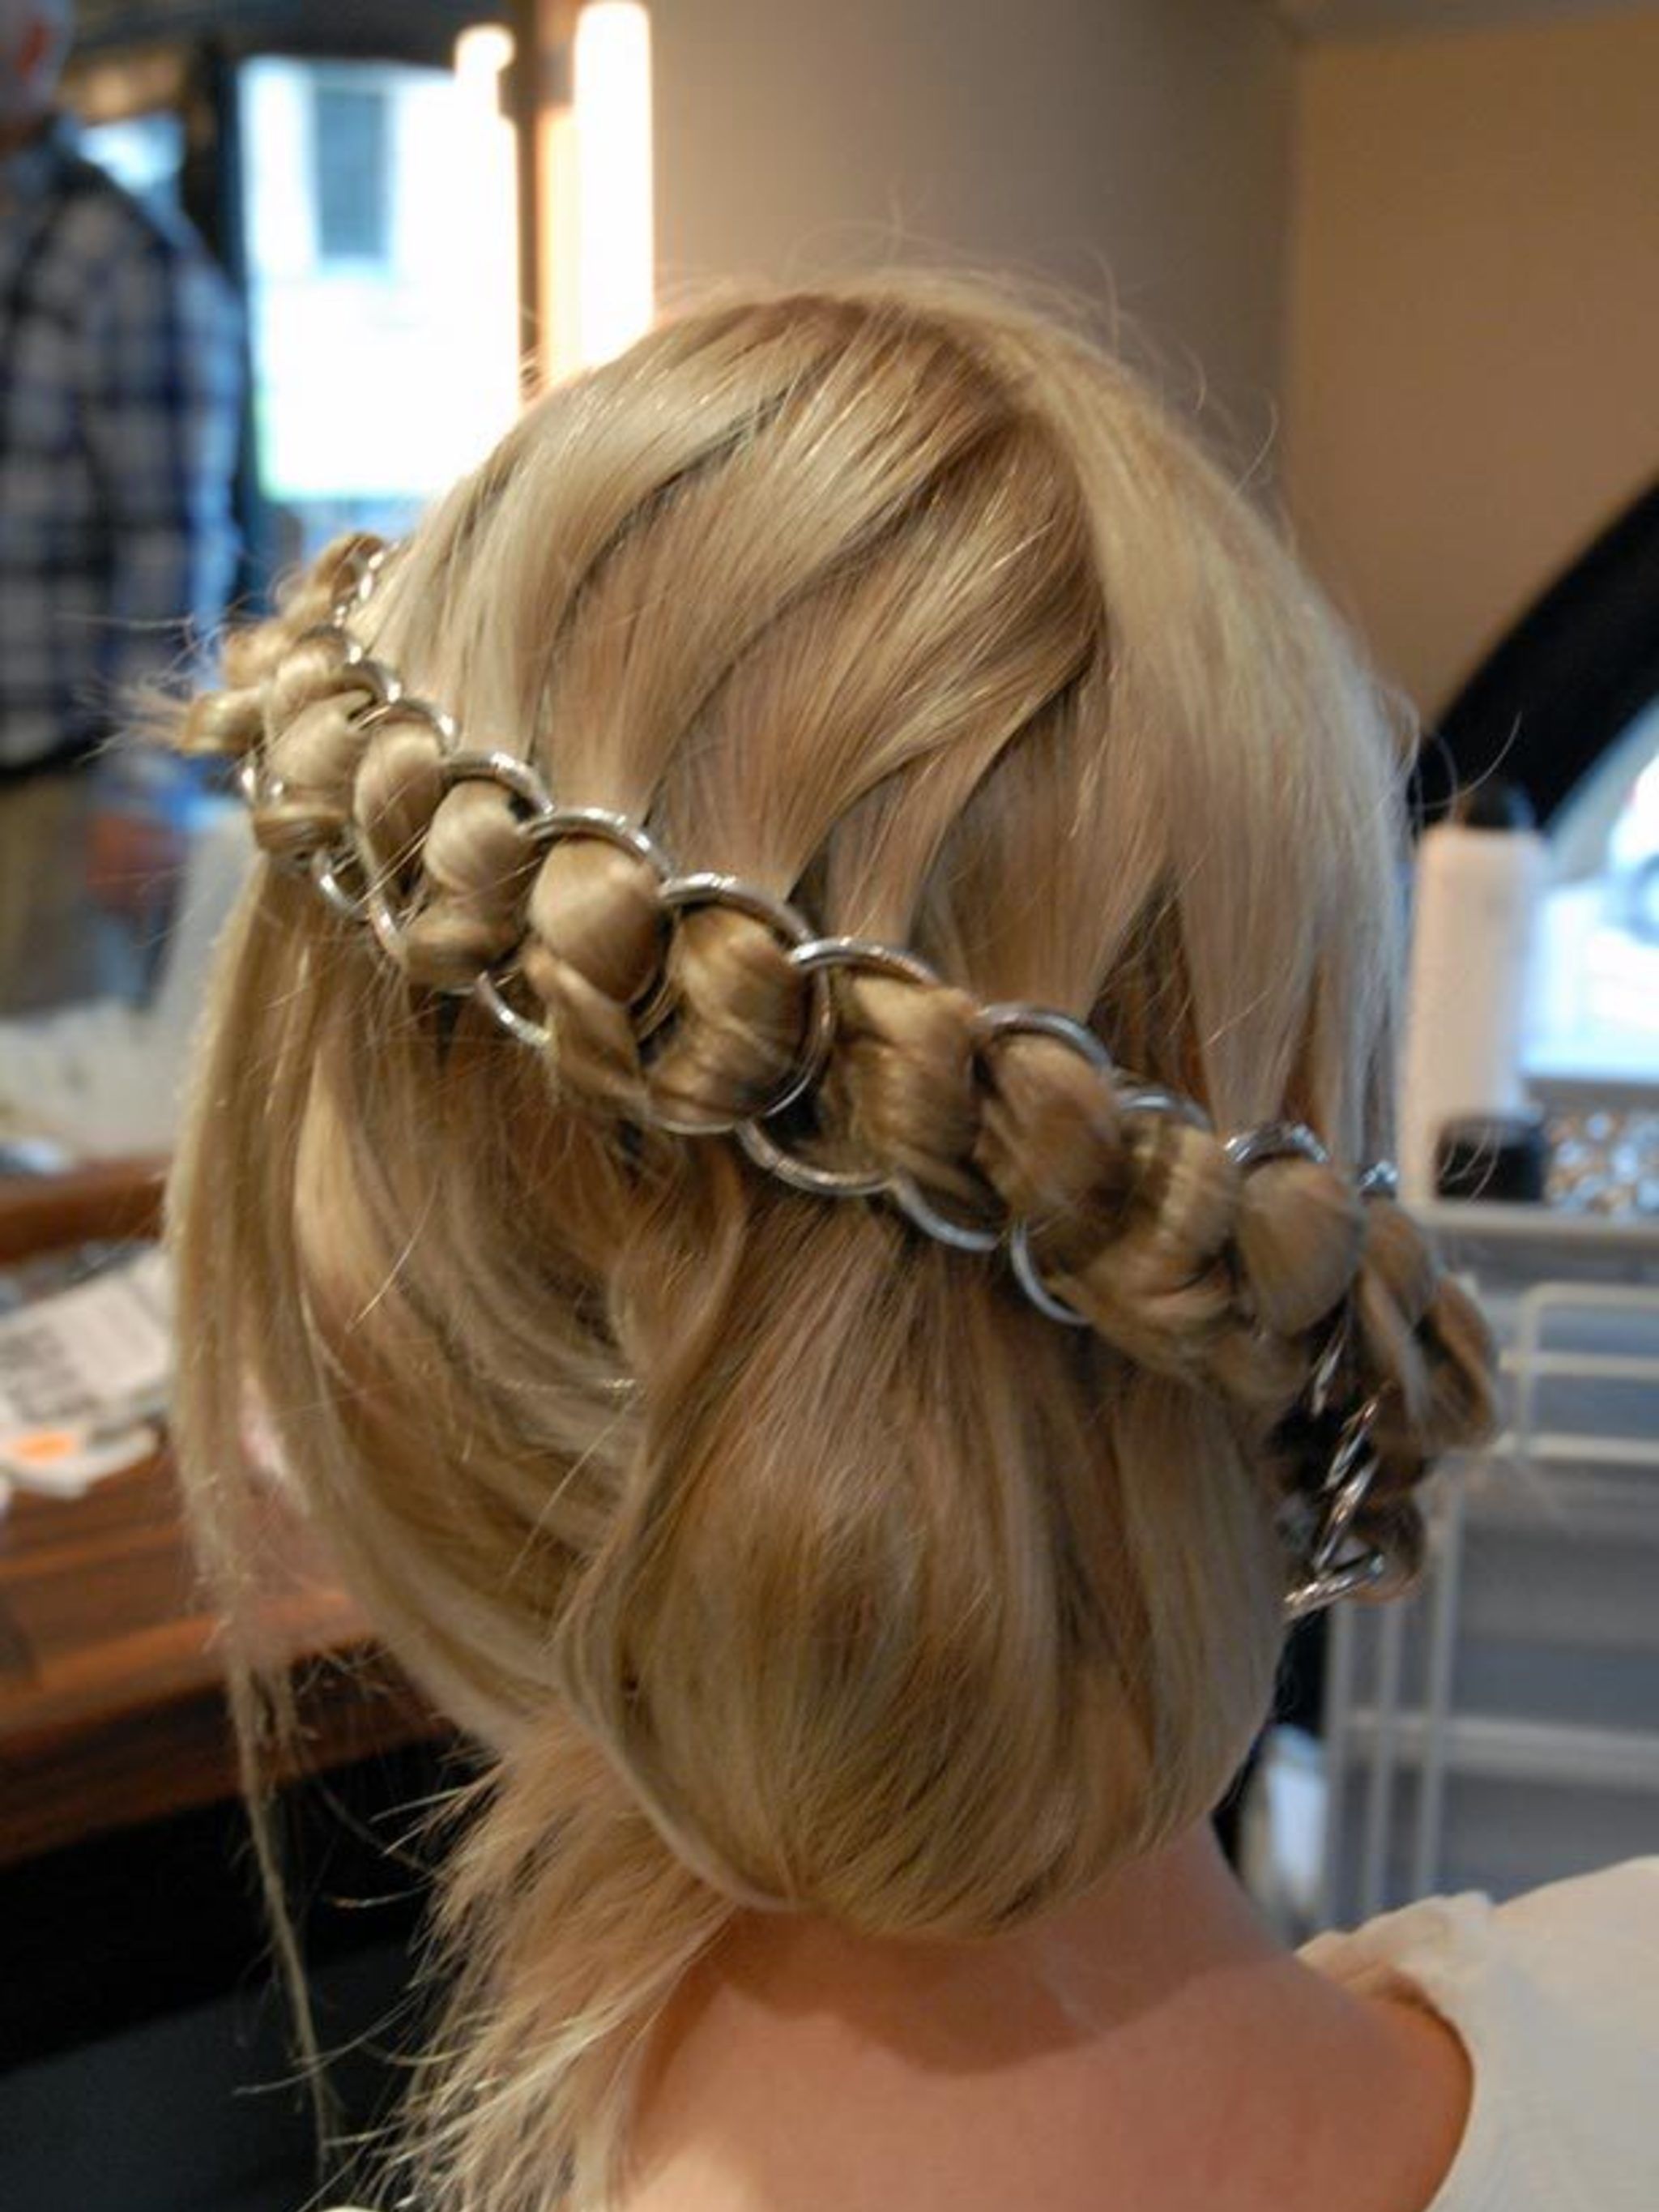 How to: Chainmail Braid